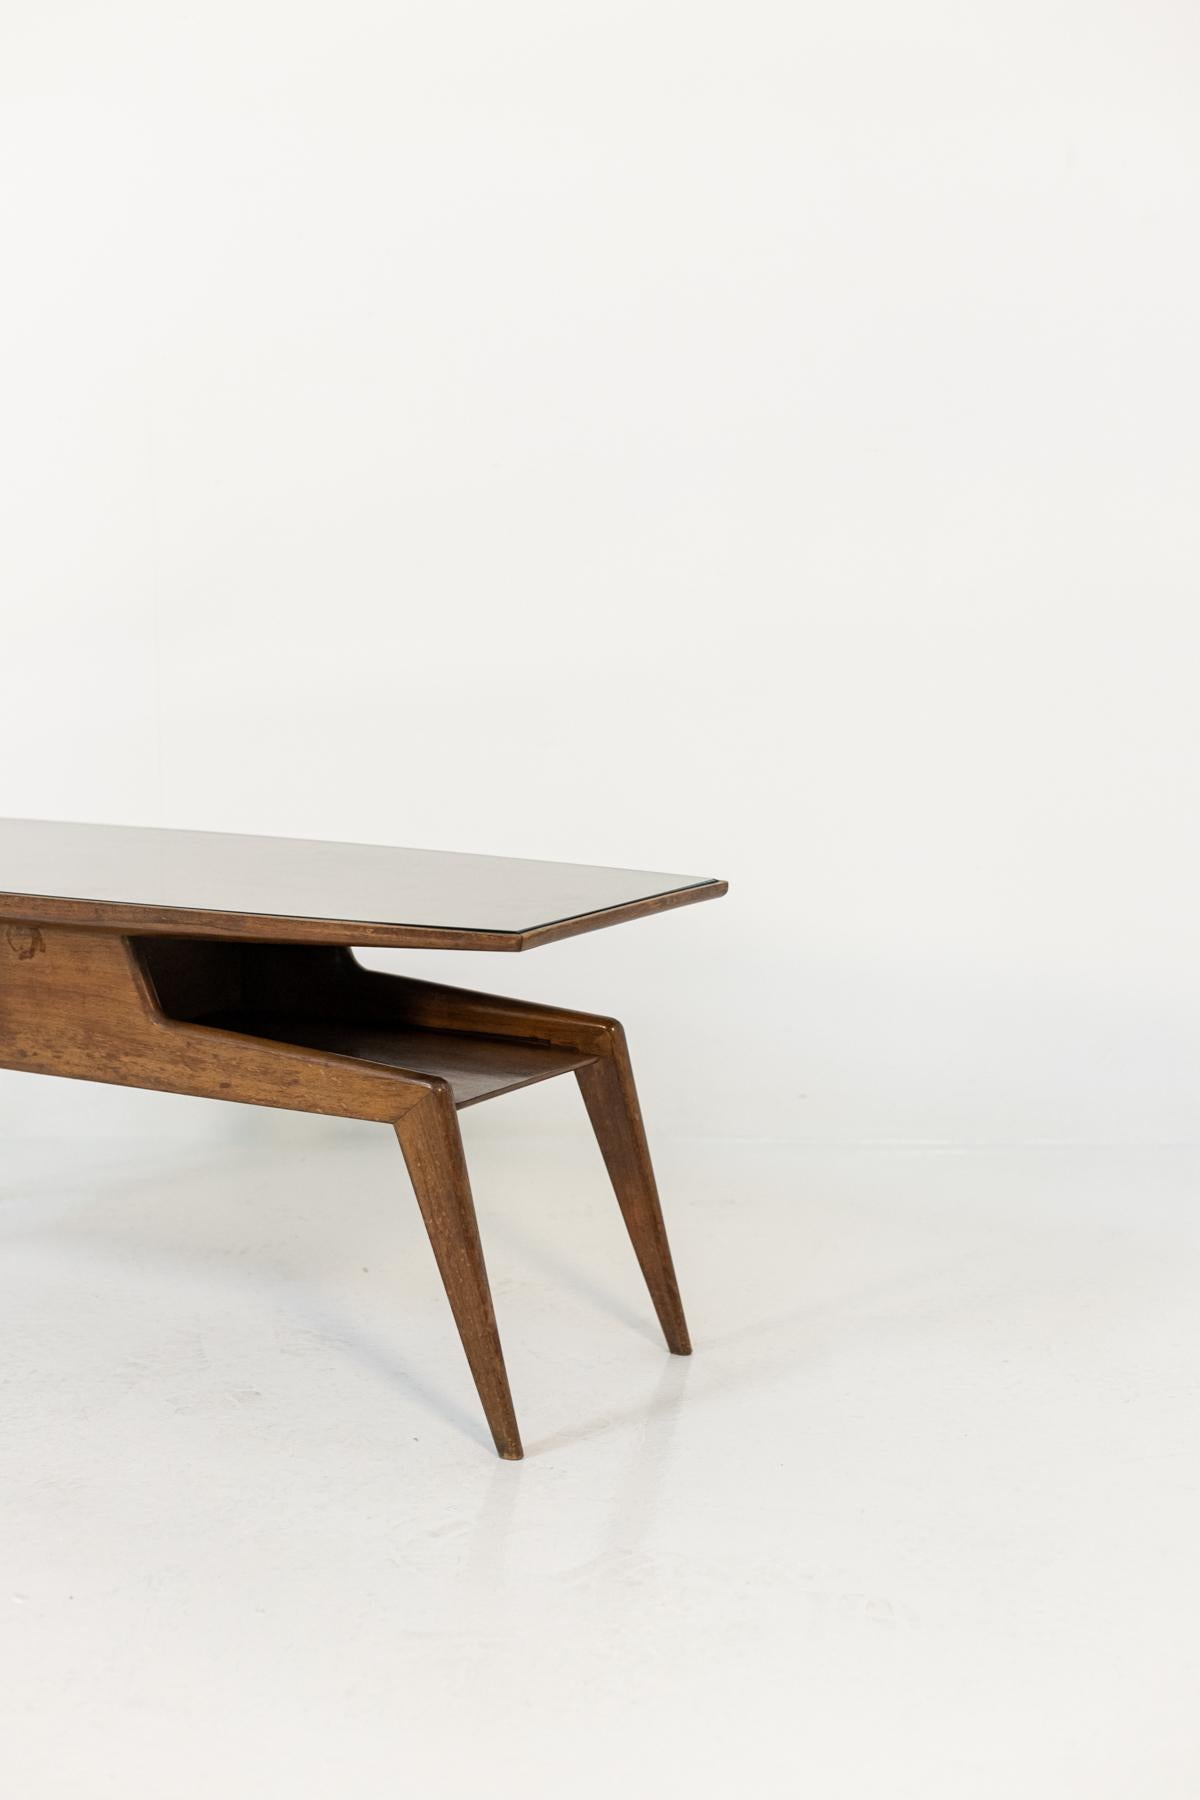 Mid-20th Century Rare Coffee Table Attr. to Gio Ponti in Walnut Wood and Glass